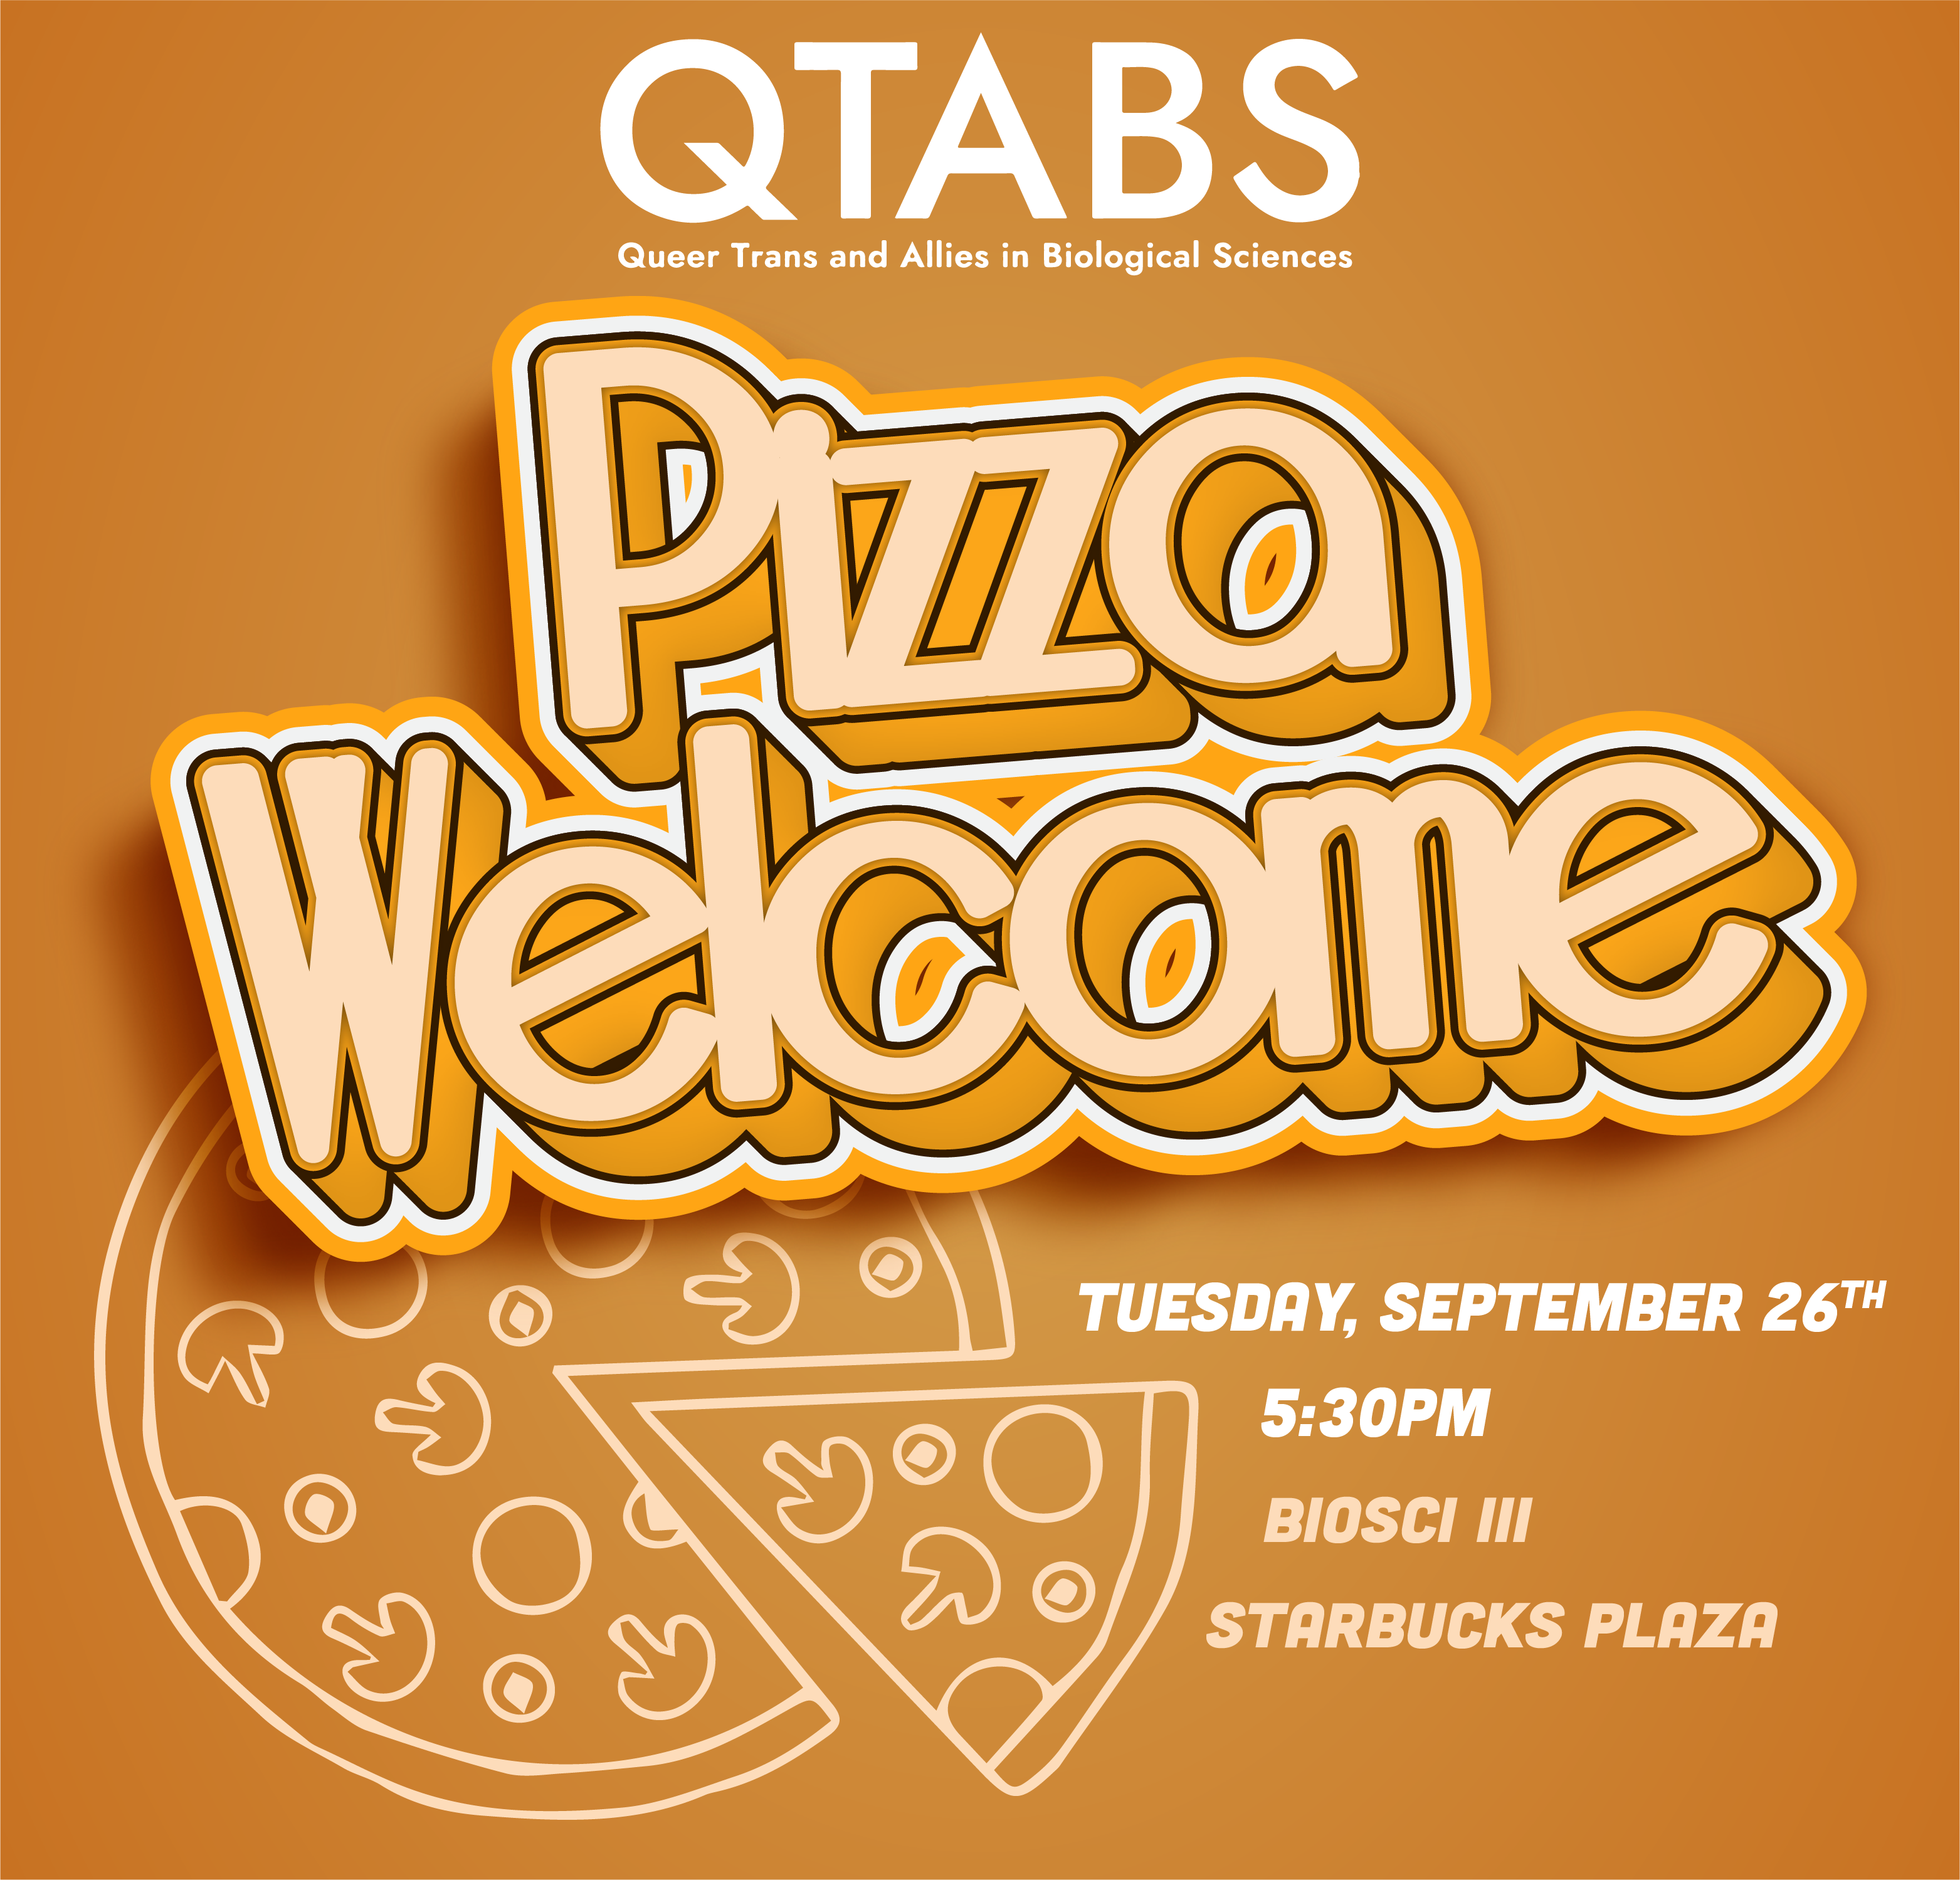 QTABS presents our Pizza Welcome Social. Tuesday September 26th 5:30PM at Biological Sciences 3 Starbucks Plaza!